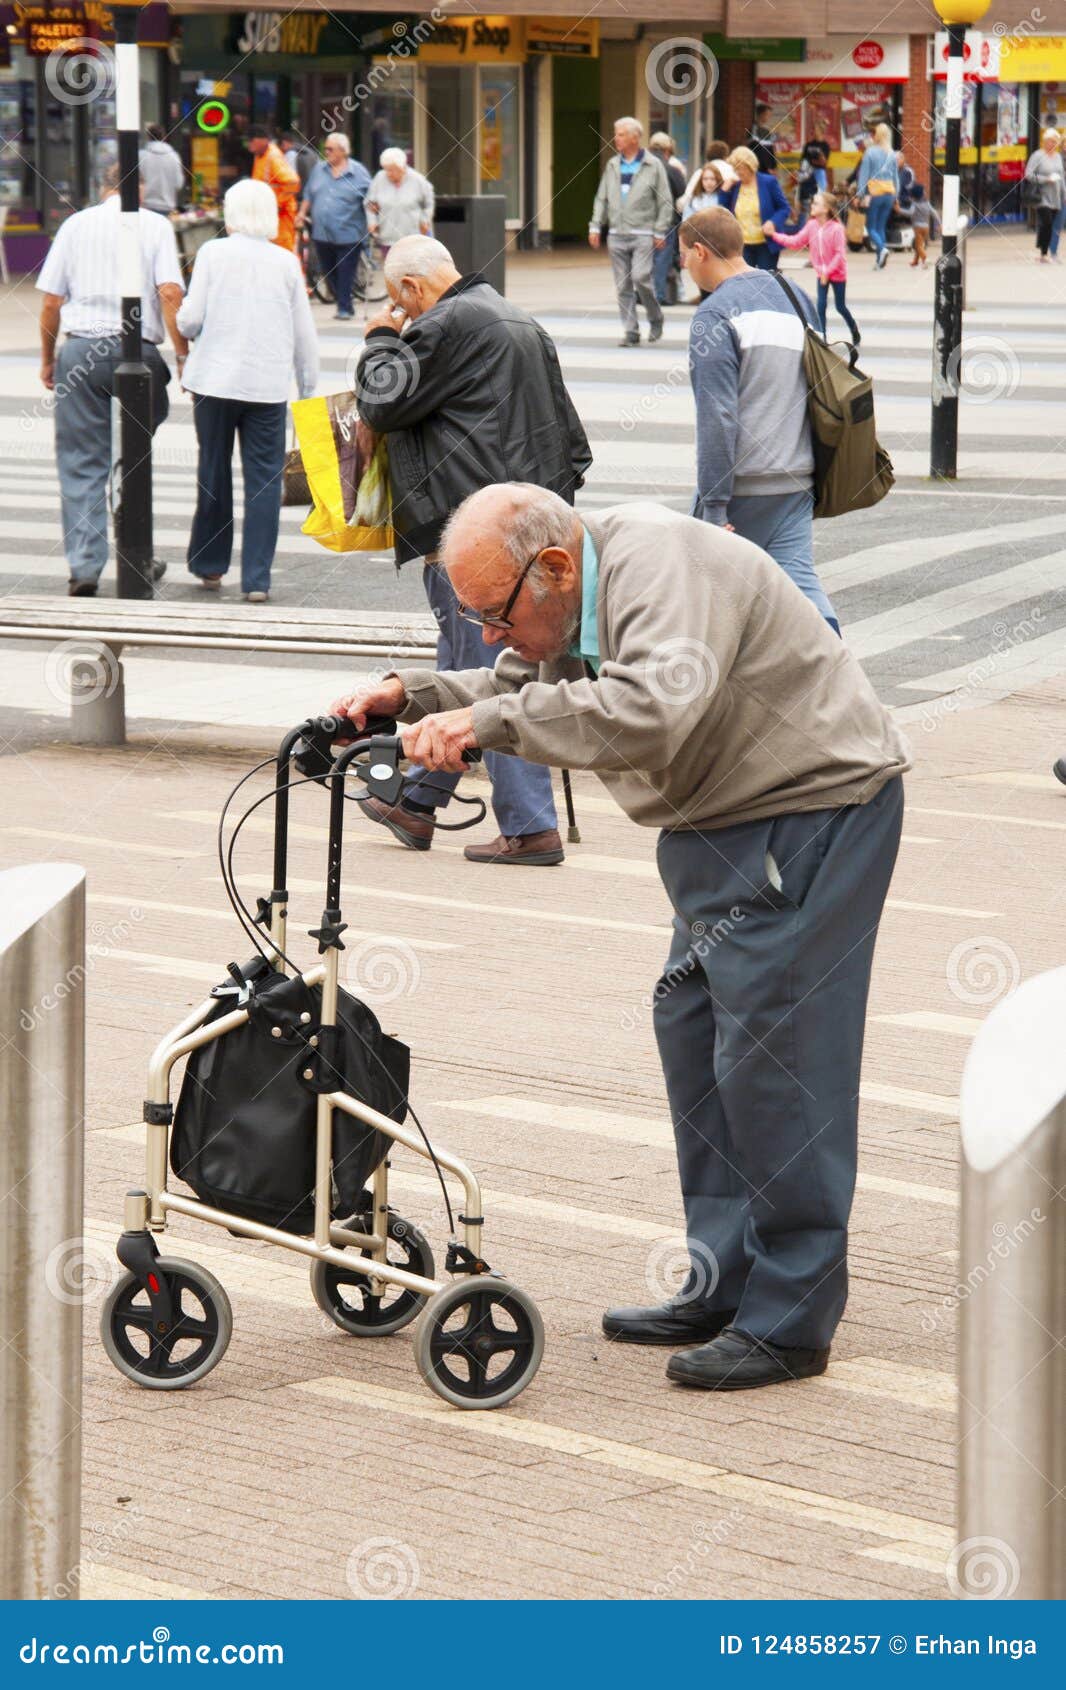 corby-united-kingdom-august-old-man-using-mobility-aid-standing-walking-basing-walker-conceptual-togetherness-h-124858257.jpg